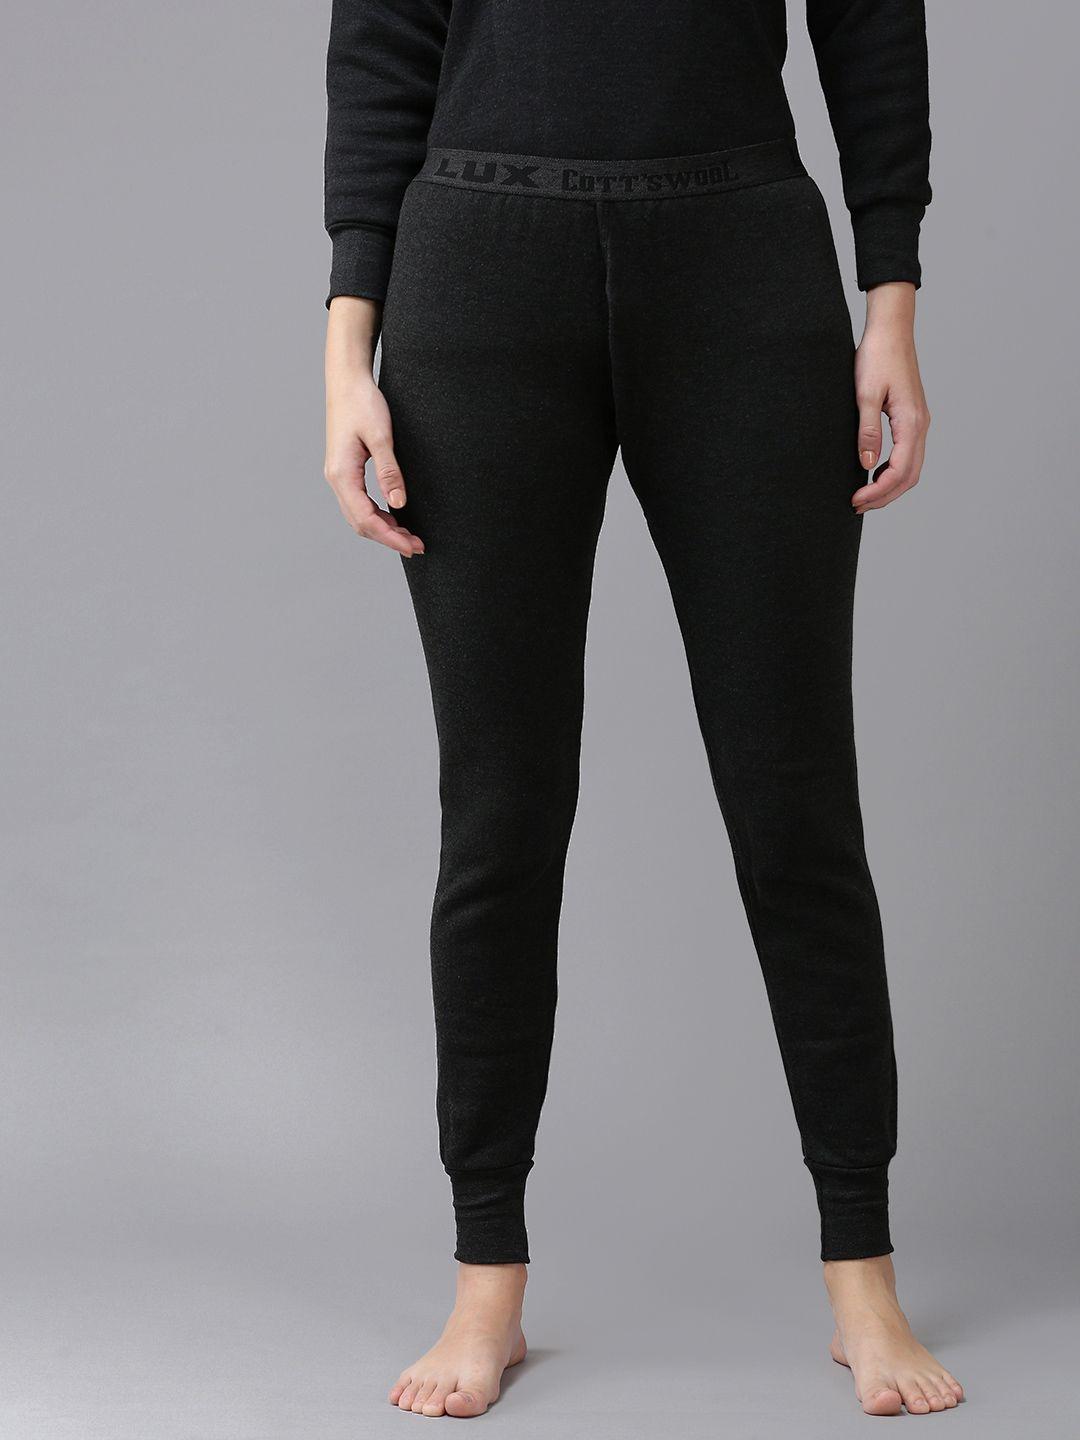 lux cottswool women black solid cotton thermal bottoms